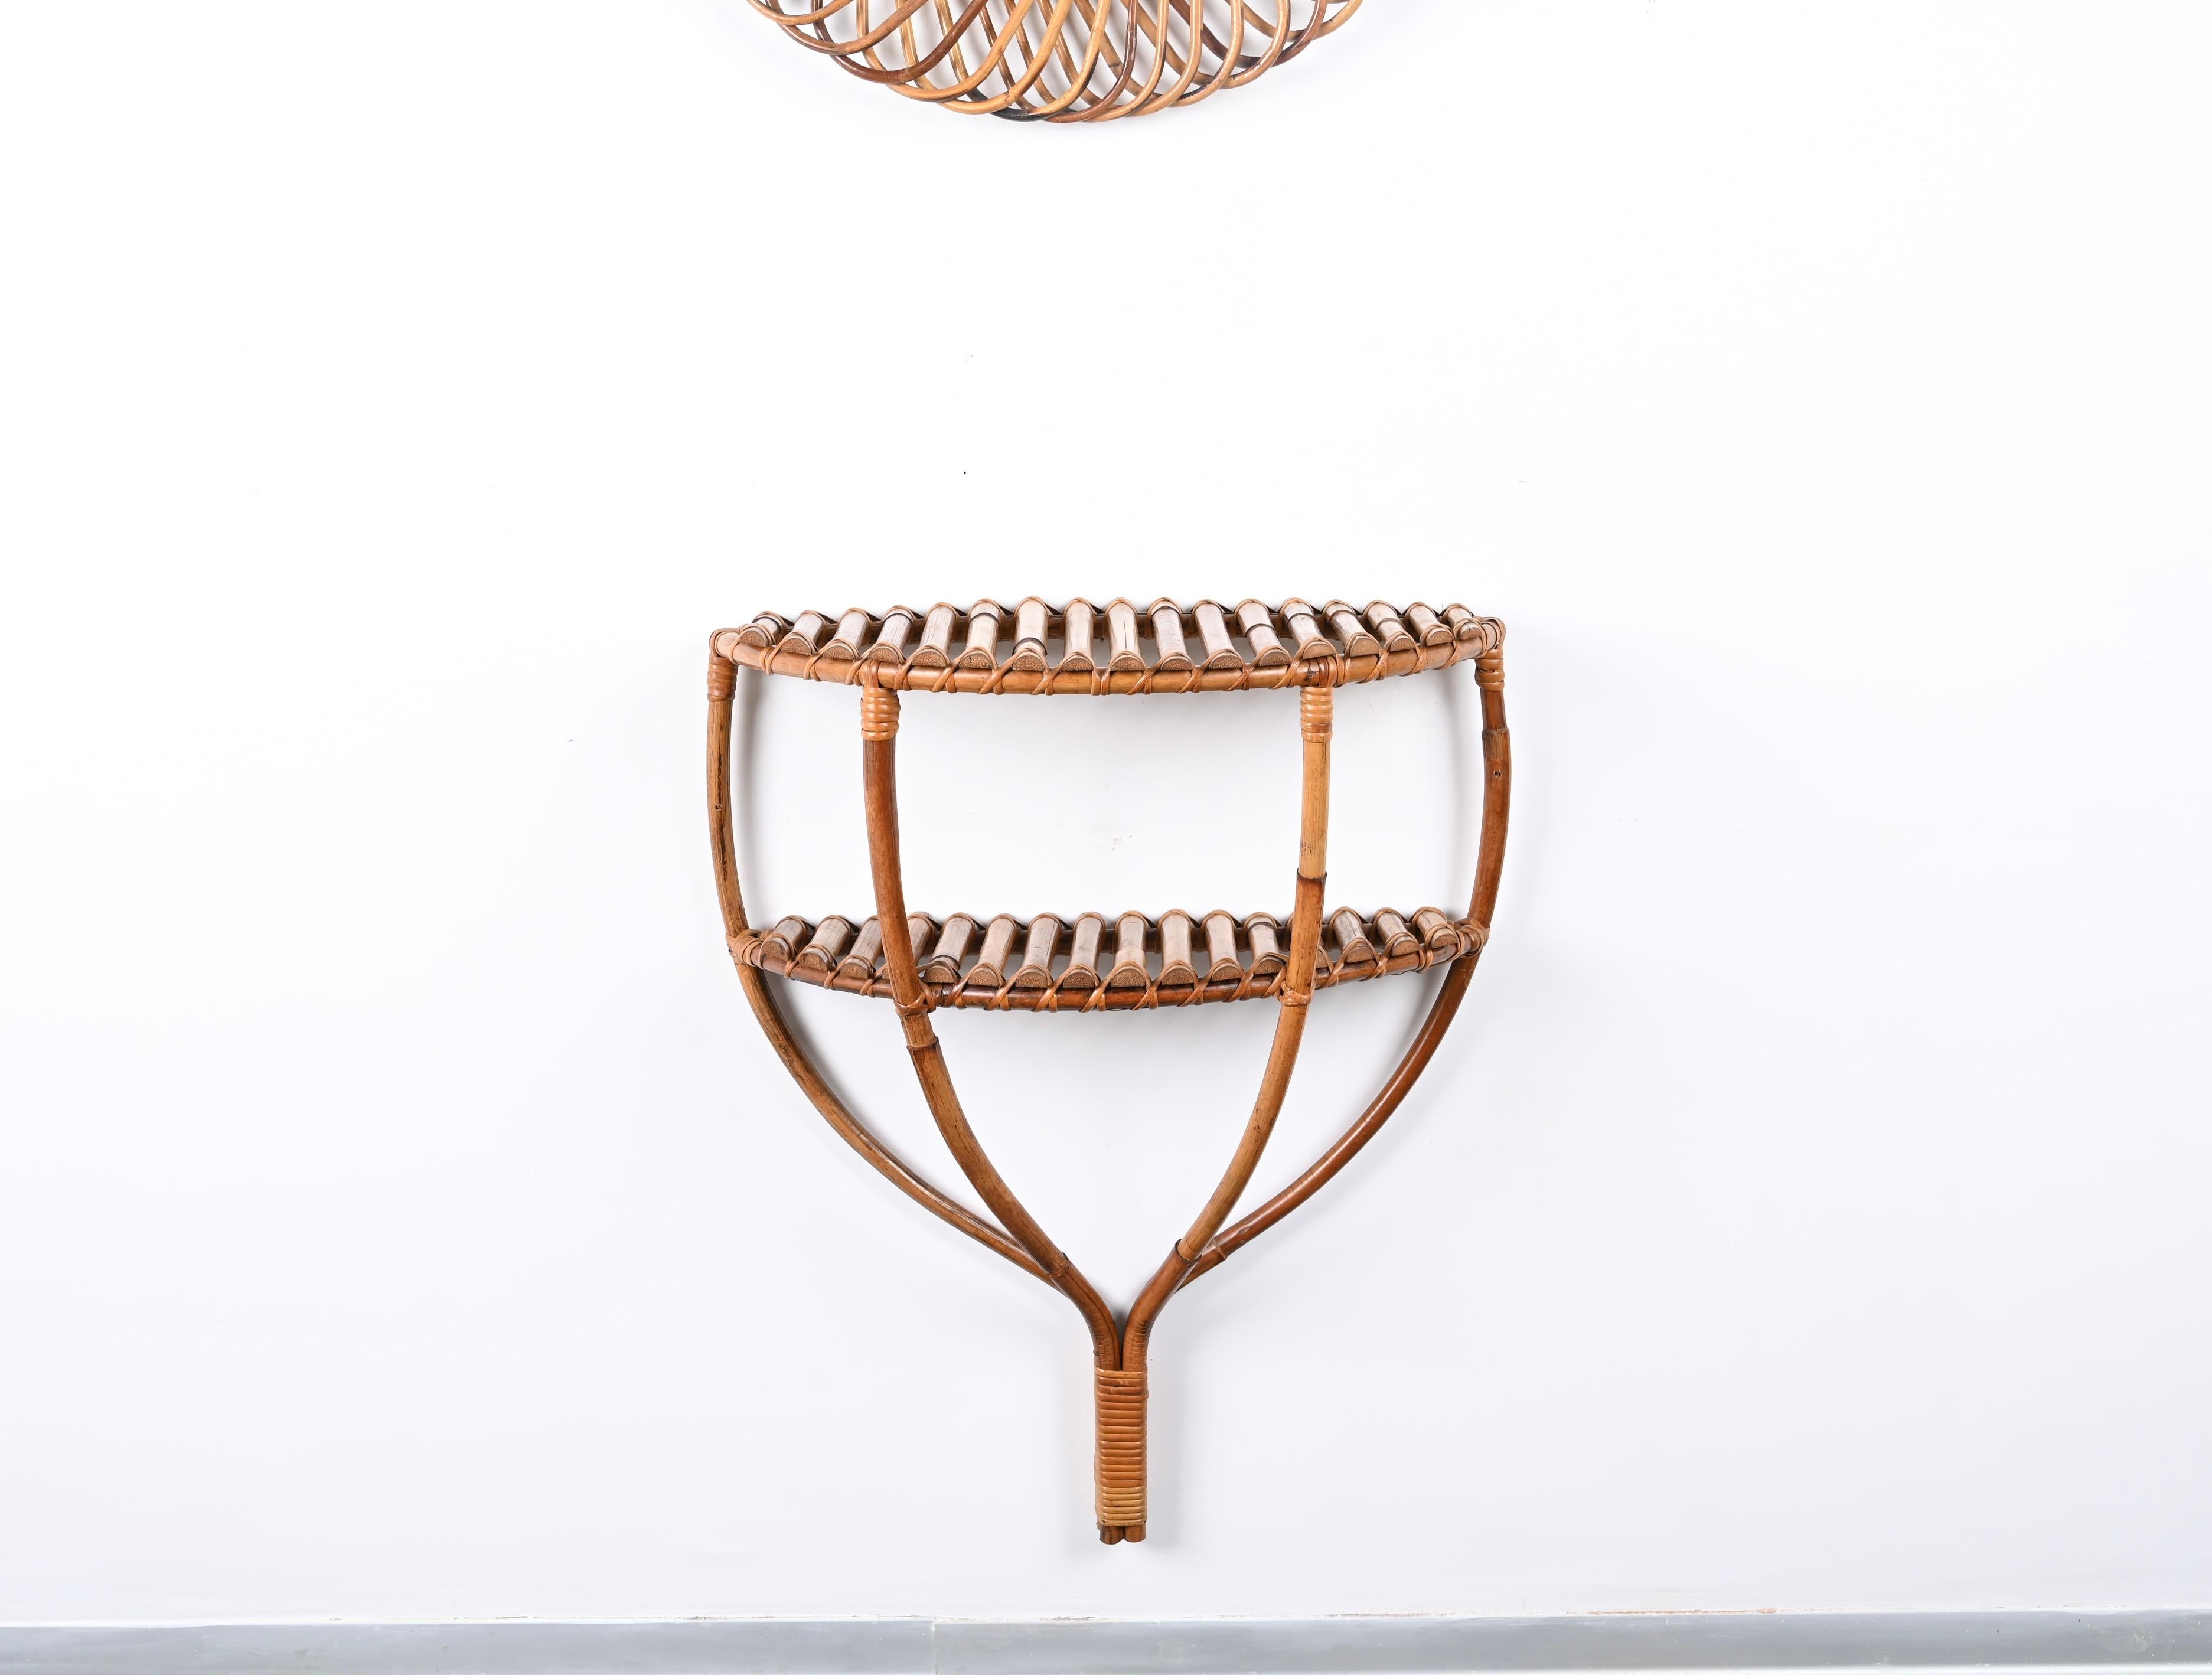 Italian Midcentury Bamboo and Rattan Console Table, Olaf Von Bohr, Italy, 1960s